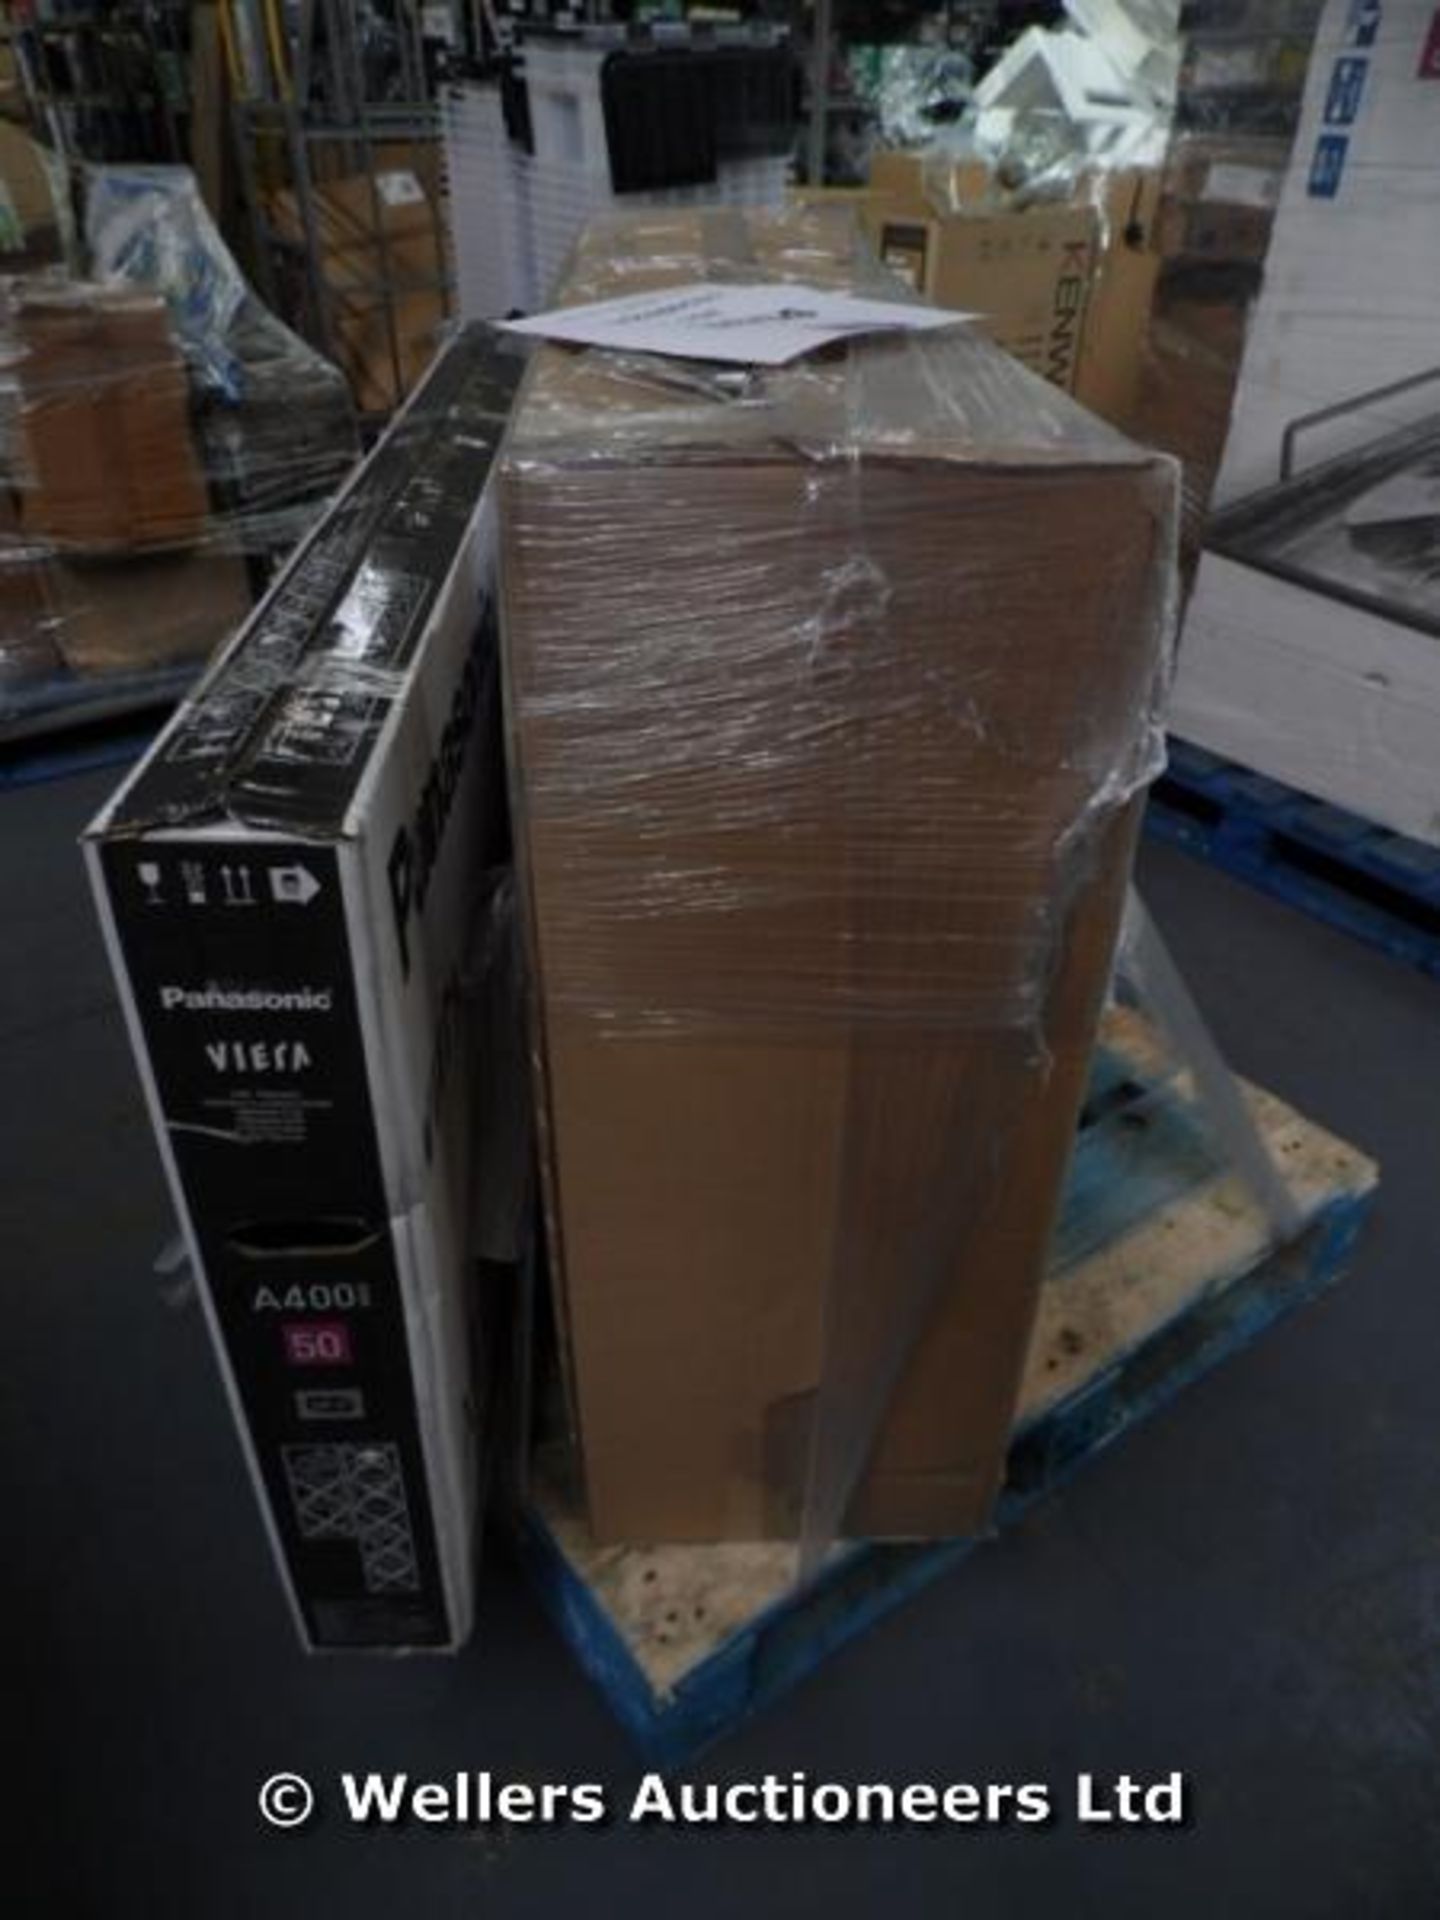 *"1X MIXED PALLET OF 3X BEYOND ECONOMICAL REPAIR TELEVISIONS INCLUDING 1X BOXED PANSONIC 50" LED TV.